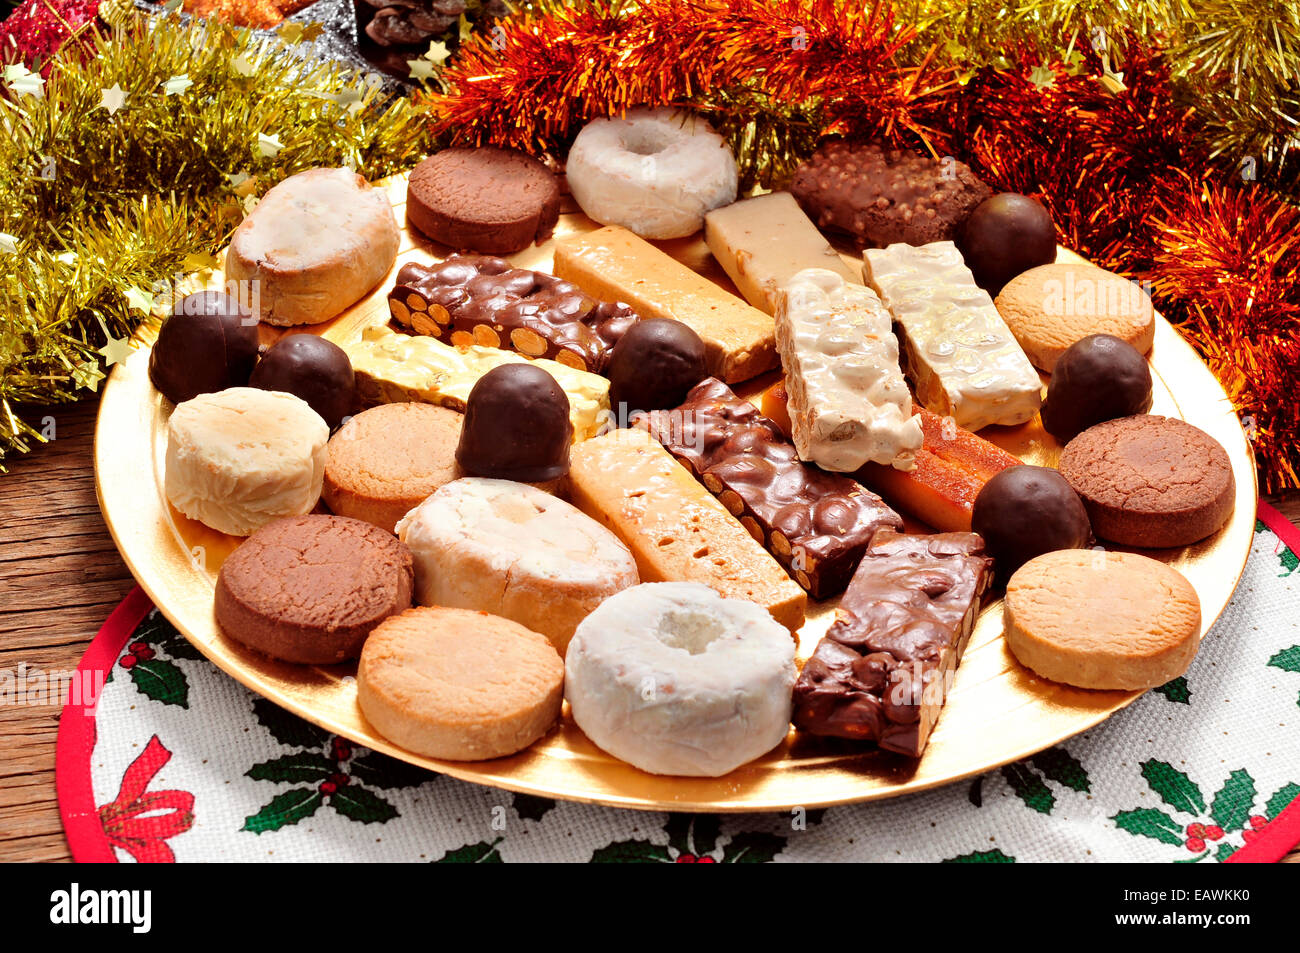 a tray with different turron, polvorones and mantecados, typical christmas confections in Spain, on an ornamented table Stock Photo